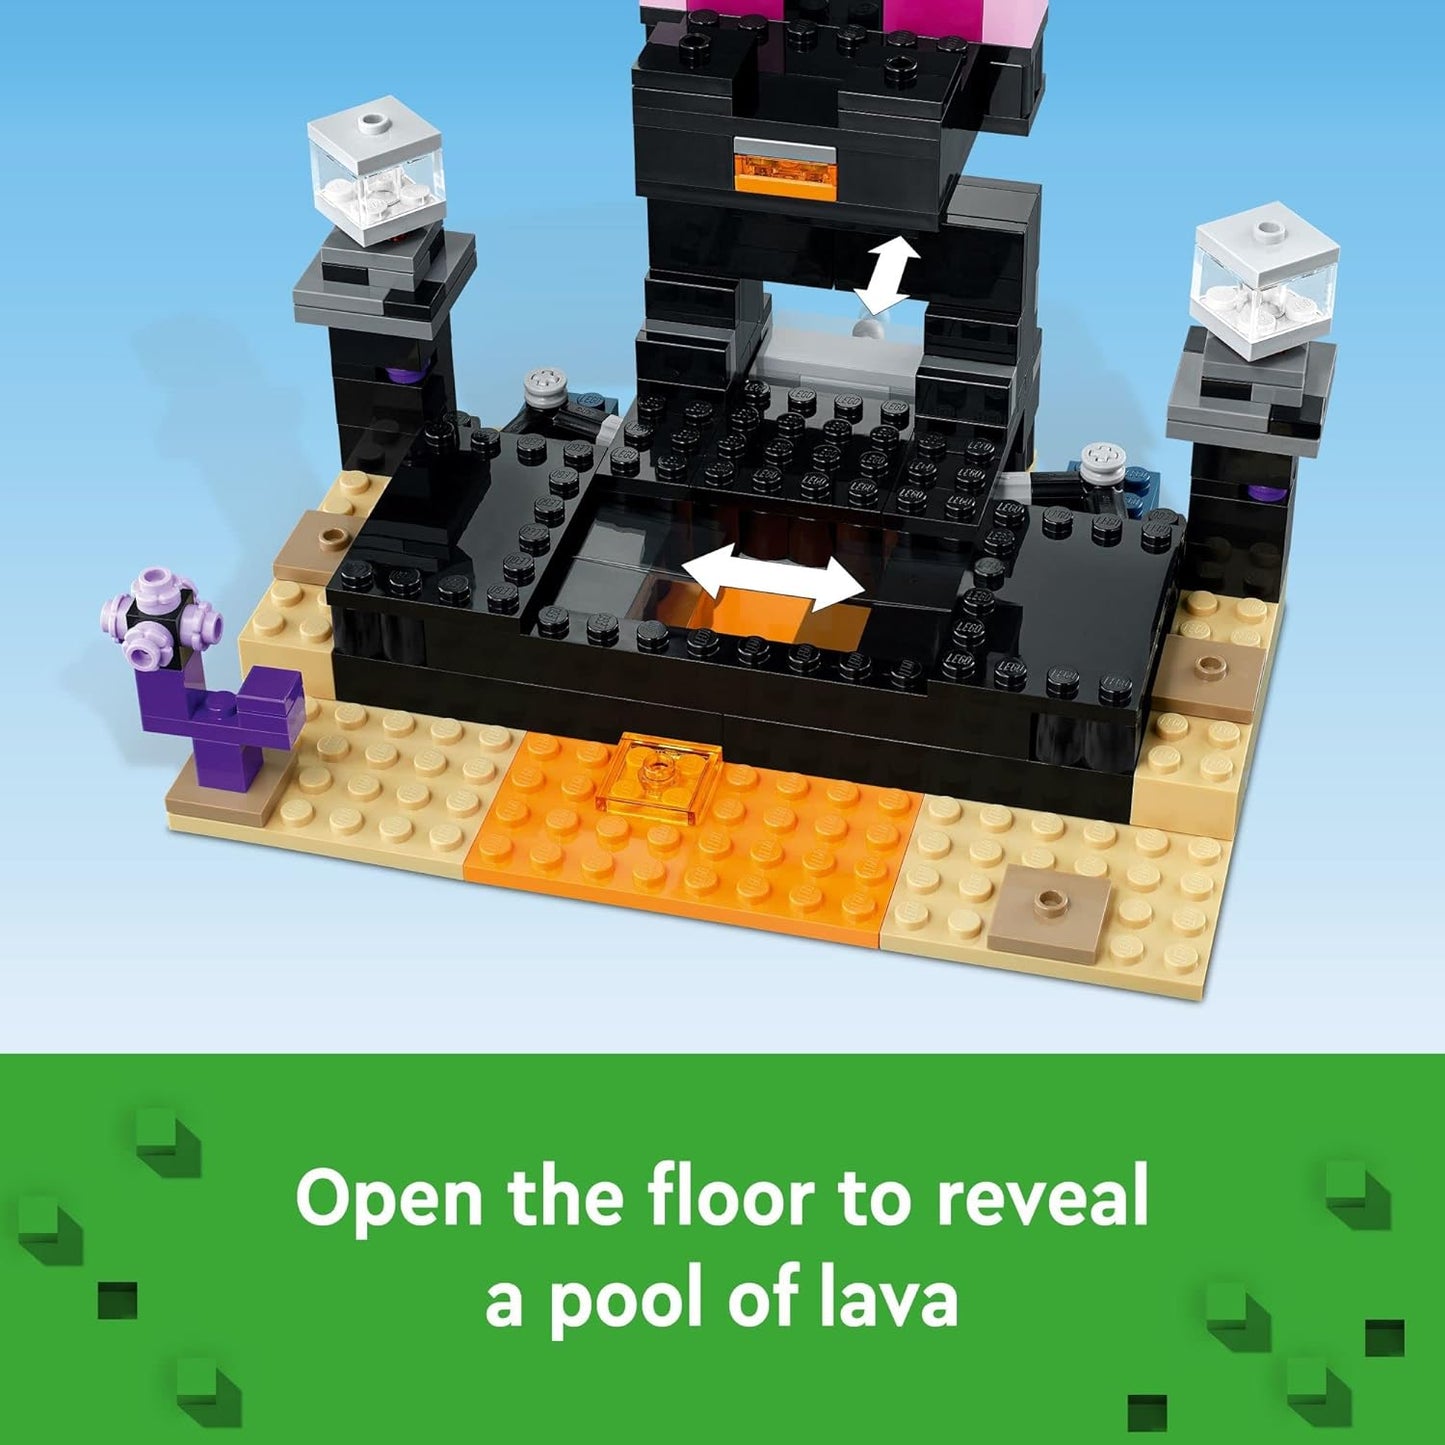 LEGO Minecraft - The End Arena 21242